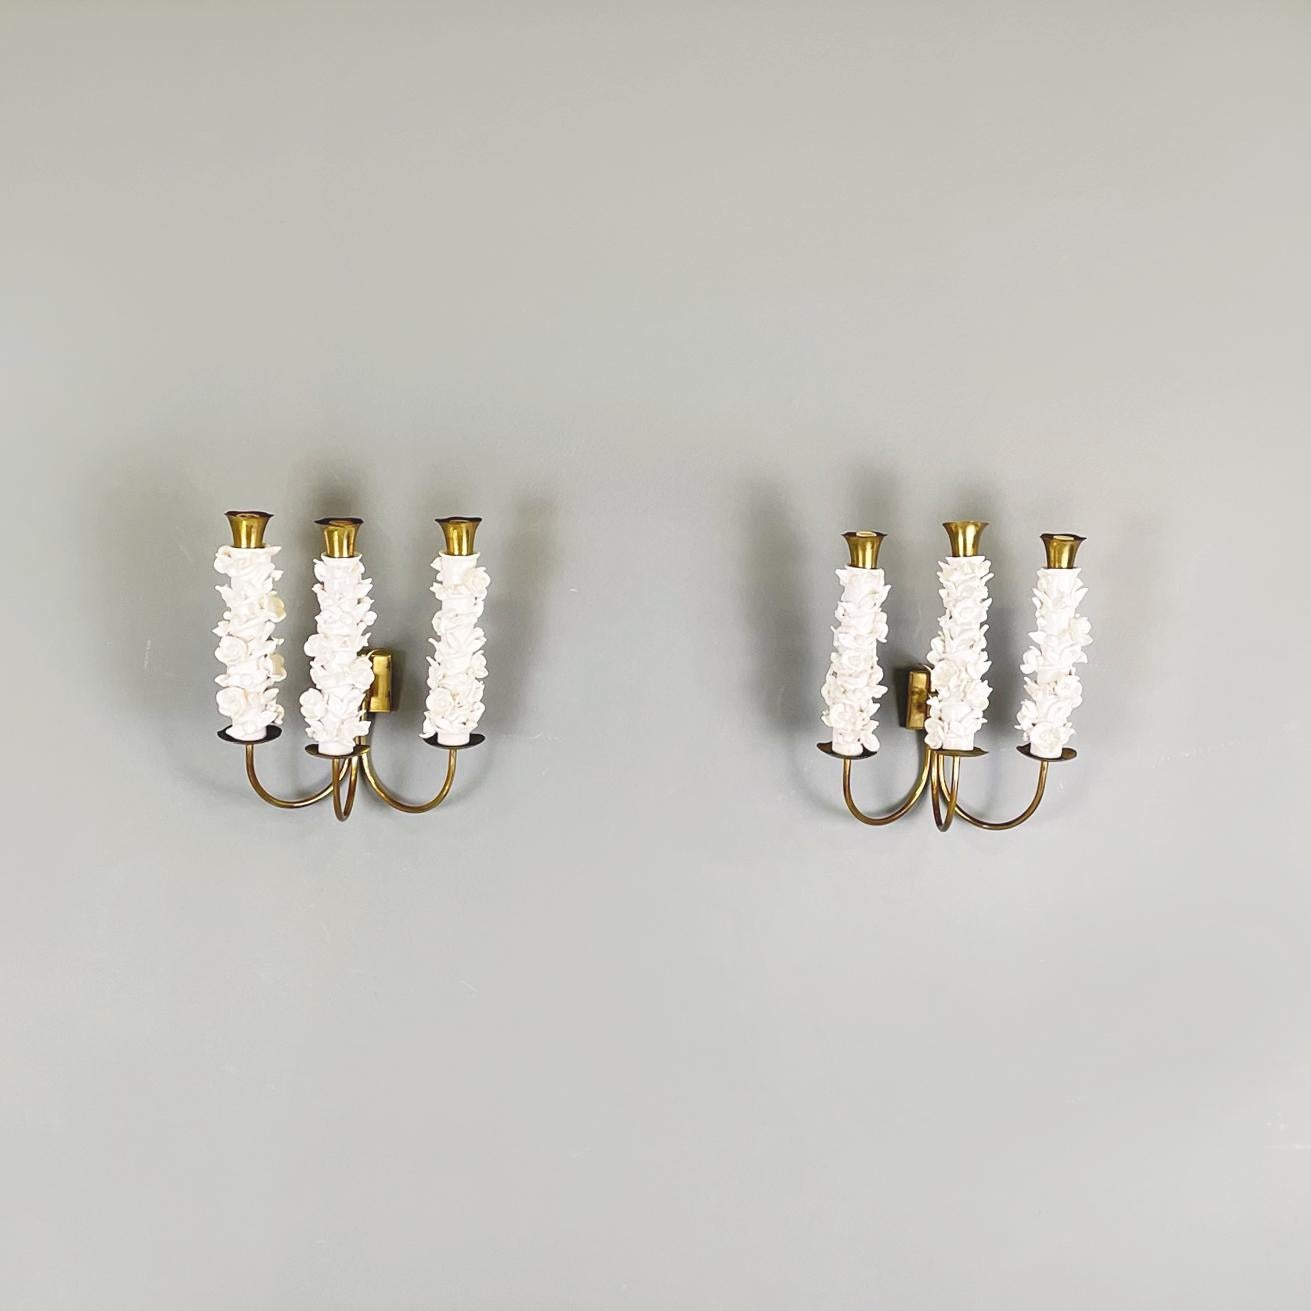 Italian midcentury Brass and white floral design ceramic Wall lamps by Luigi Zortea, 1949
Set of five brass and ceramic wall lights with three lights. The structure has 3 brass rod arms and 3 brass diffusers with white ceramic floral